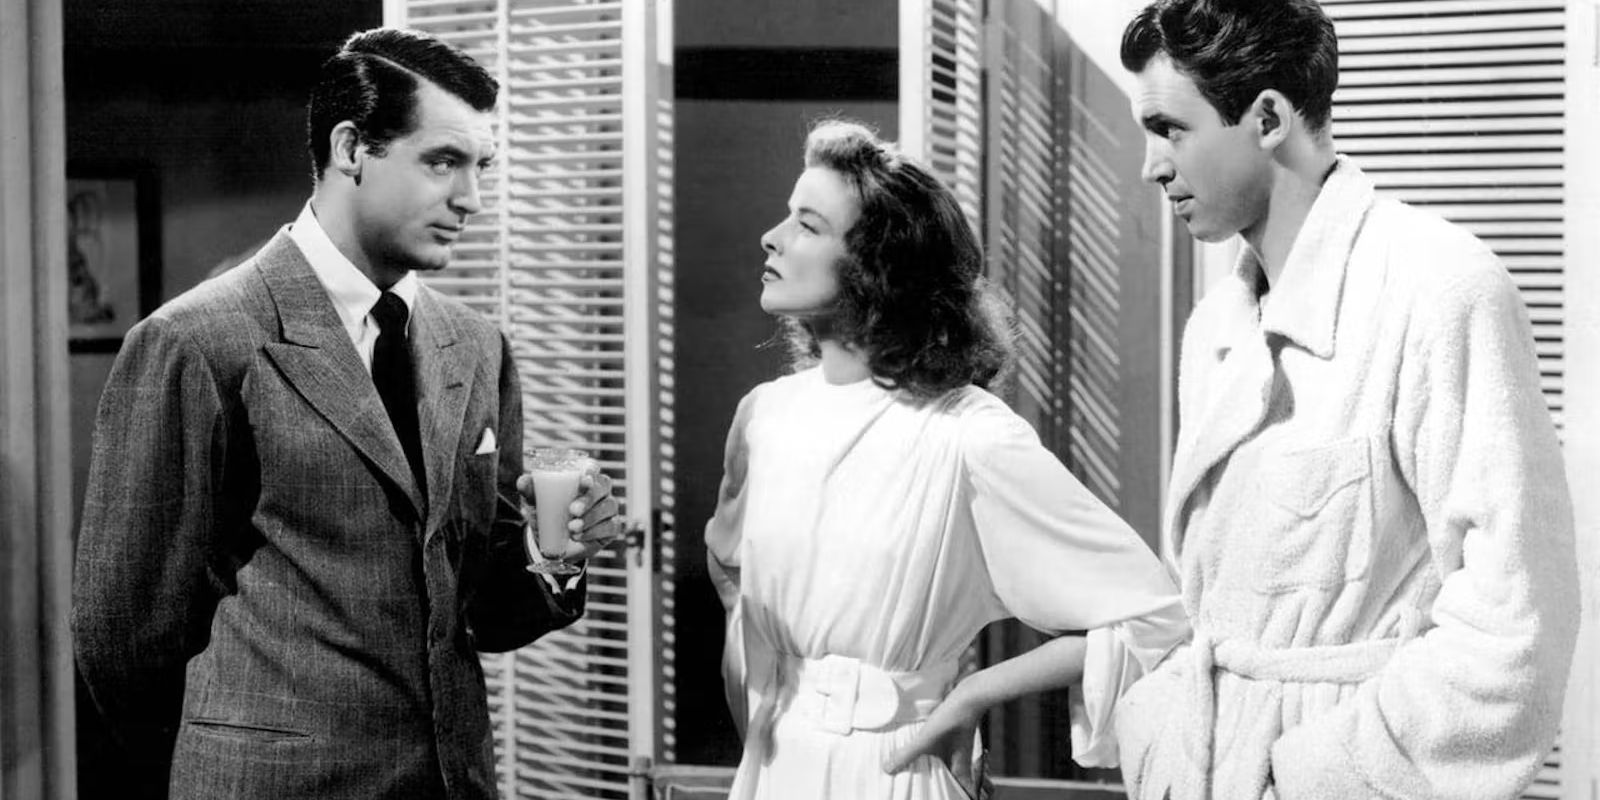 Dexter, Tracy, and Mike talking in The Philadelphia Story.